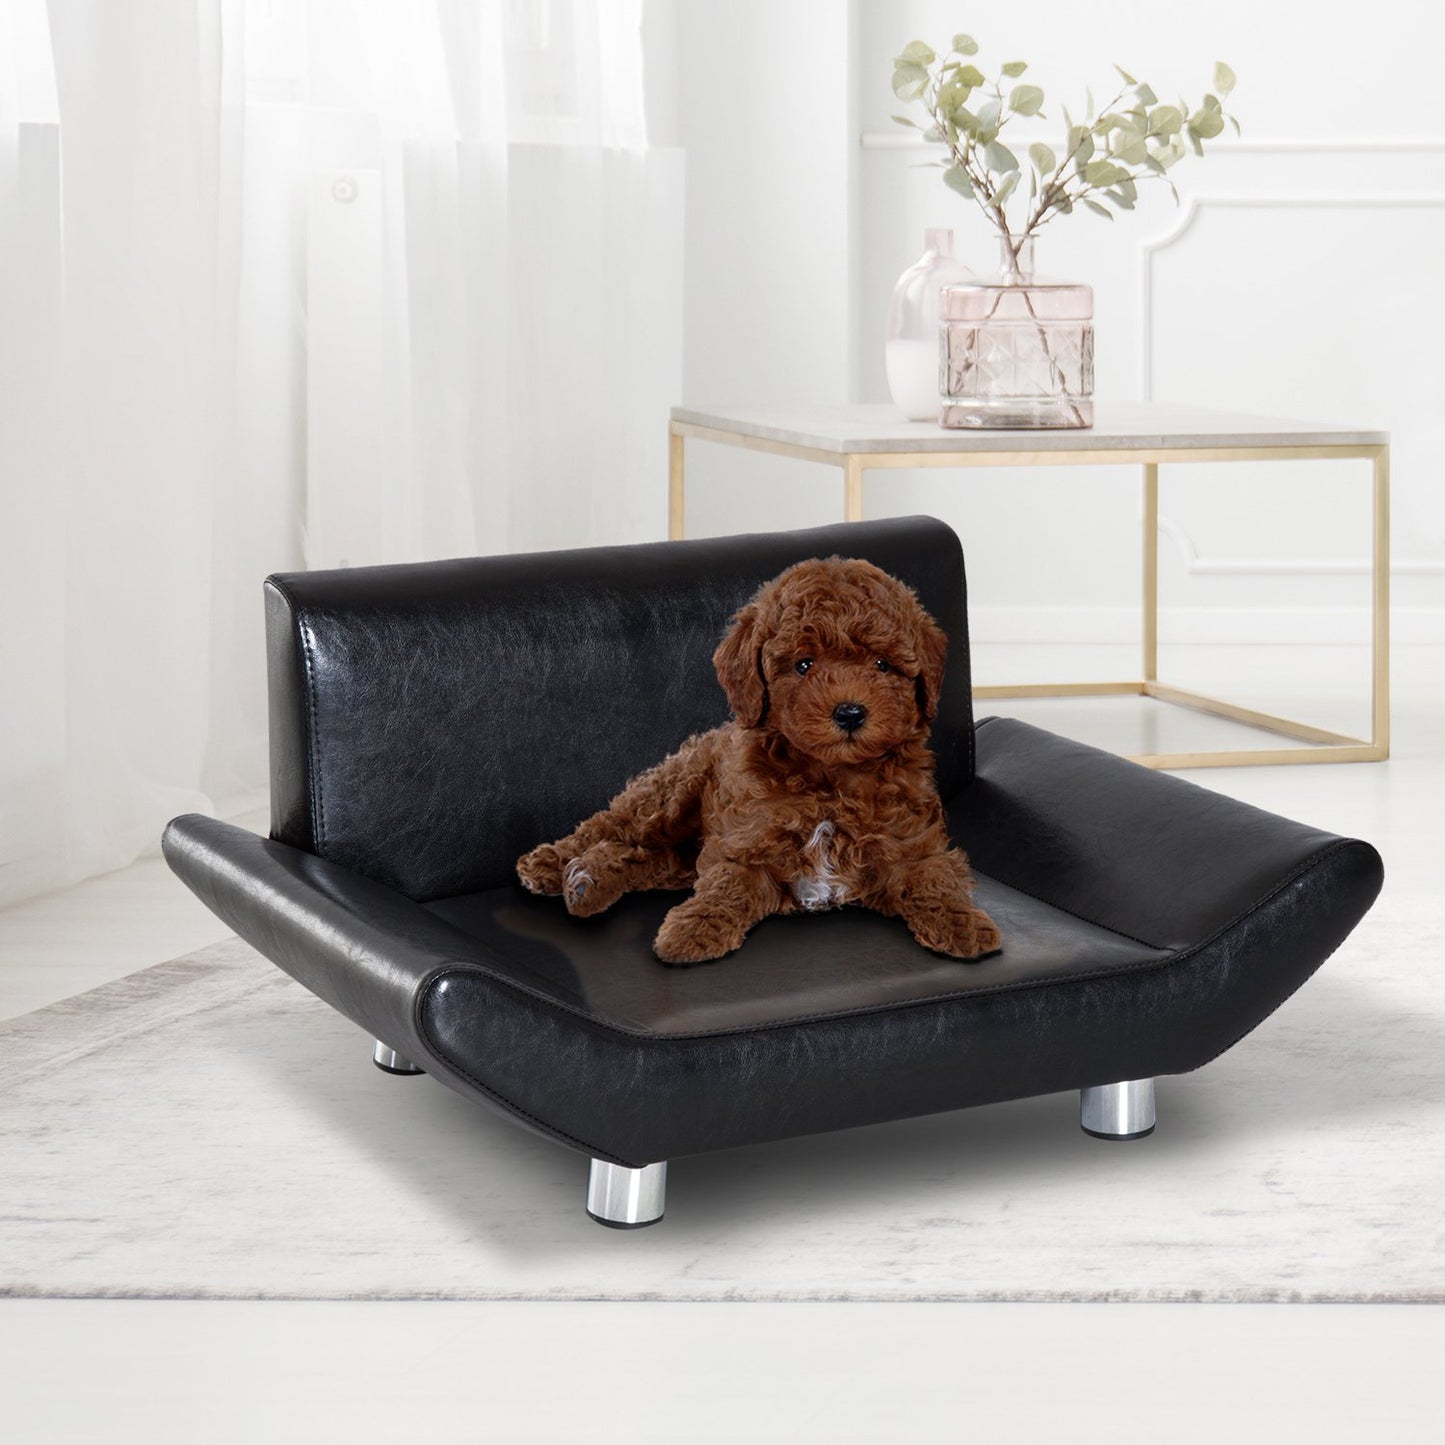 PawHut Pet Sofa Couch Bed, PU Leather, Wooden Frame-Black